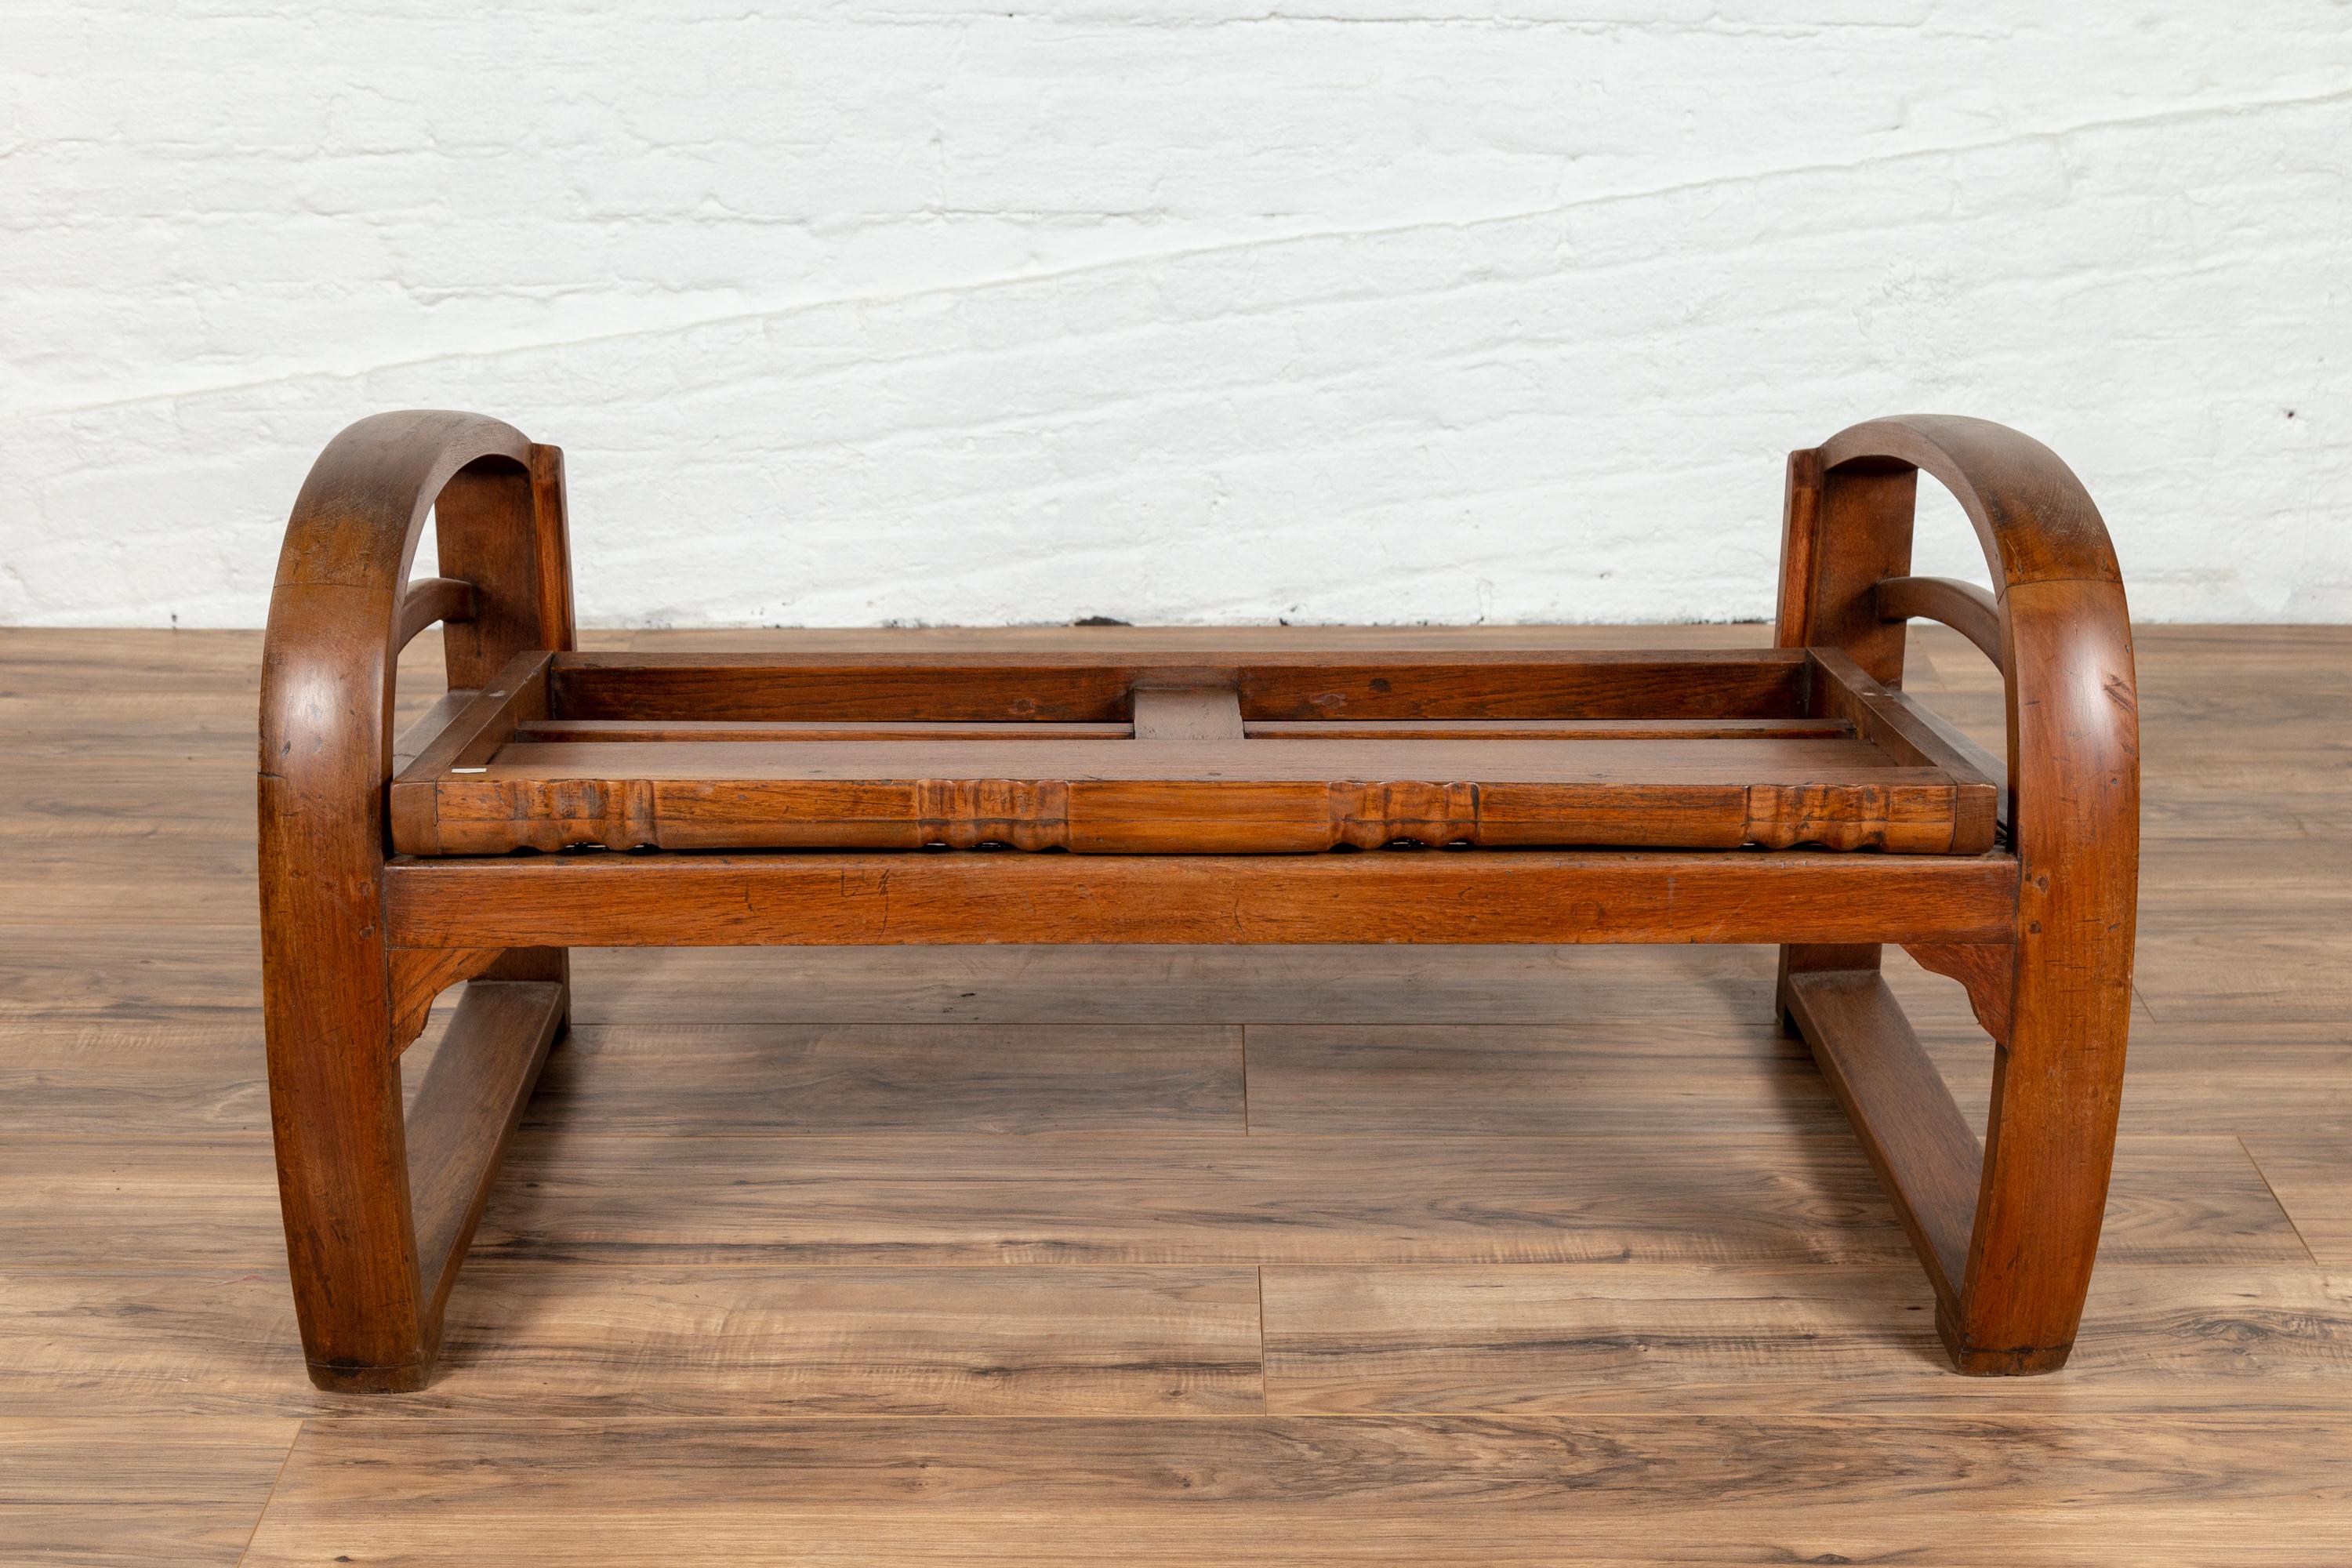 20th Century Teak Wood Settee from Madura with Folding Back, Looping Arms and Cane Seat For Sale